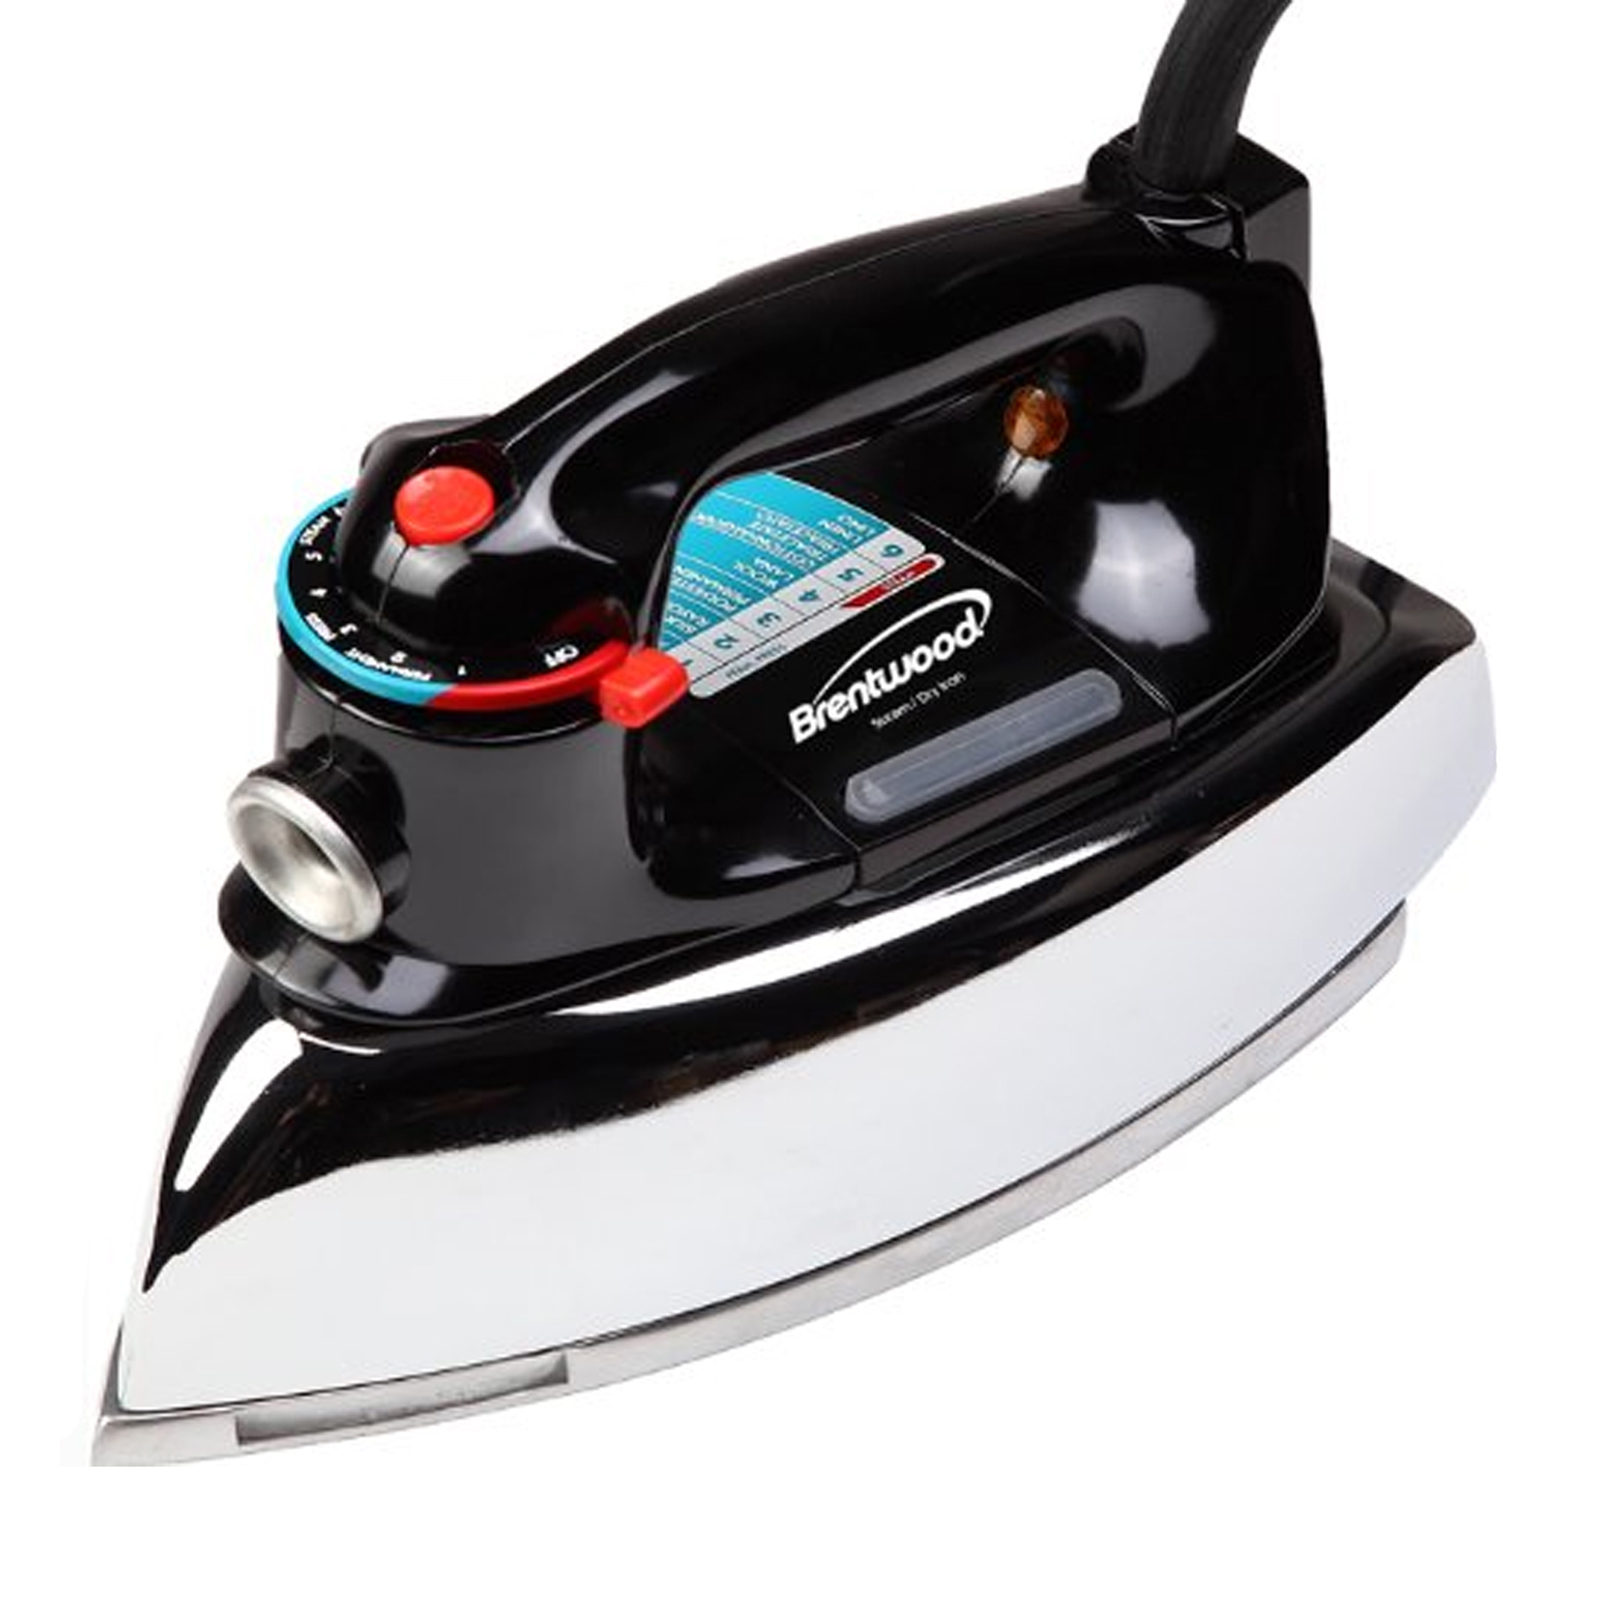 Impress Compact and Lightweight Steam and Dry Iron, Blue